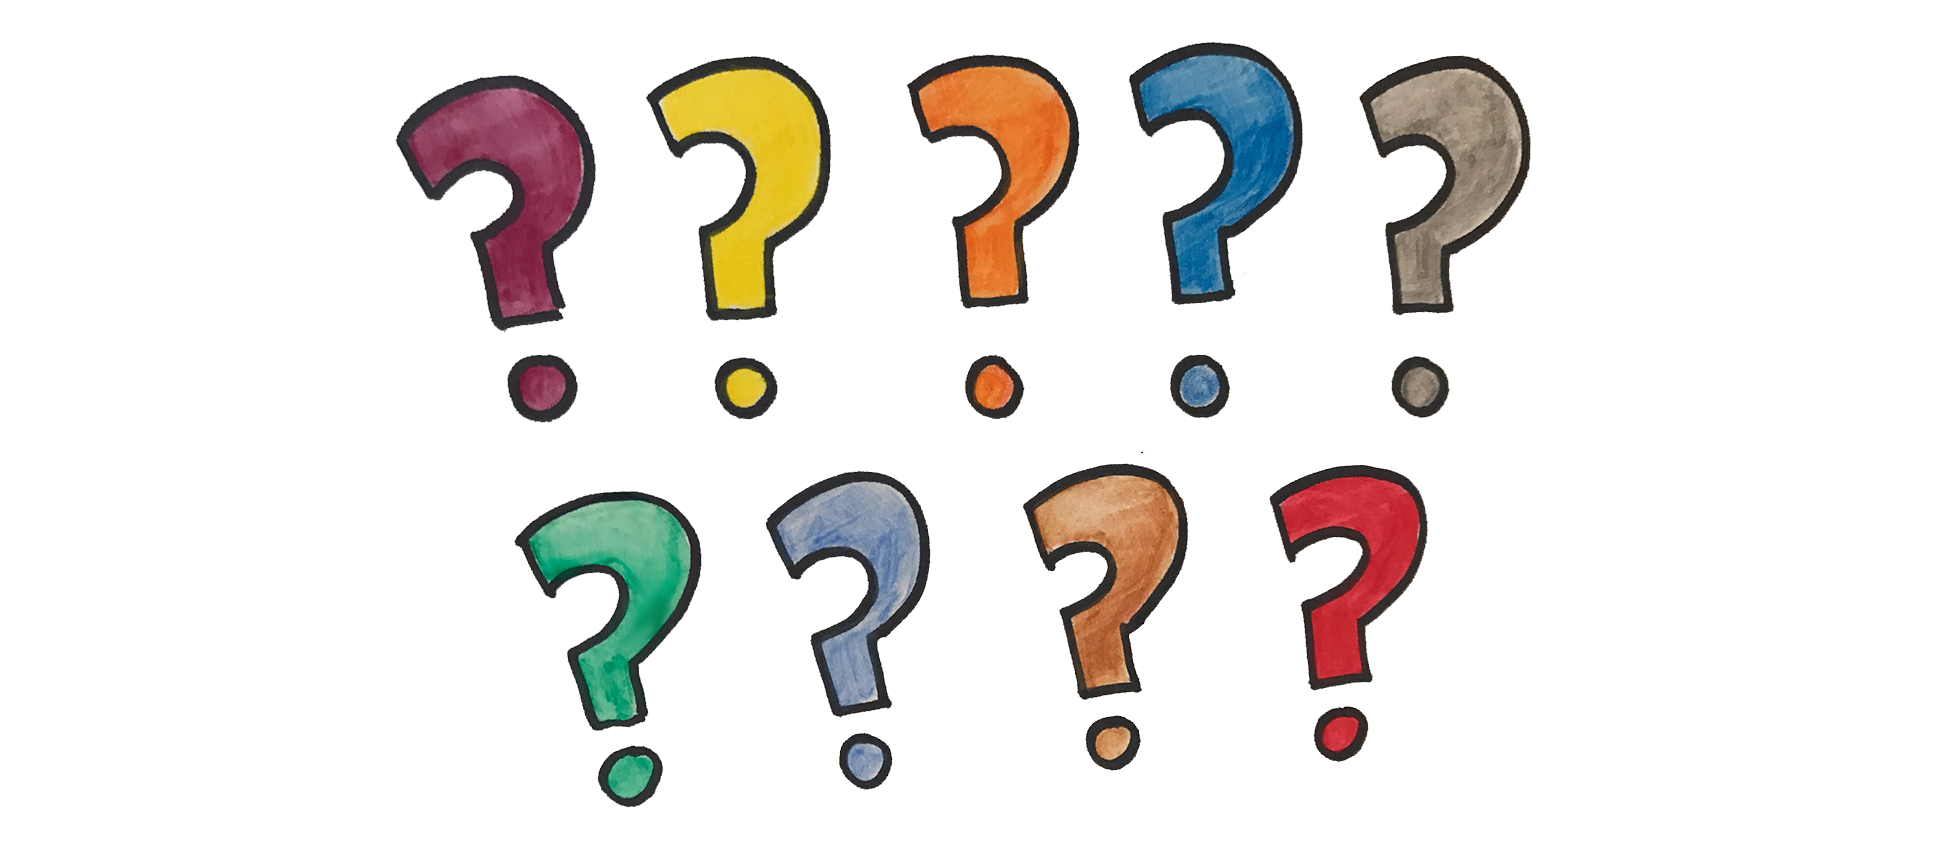 The questions that uncover. Applause clipart performance highlights